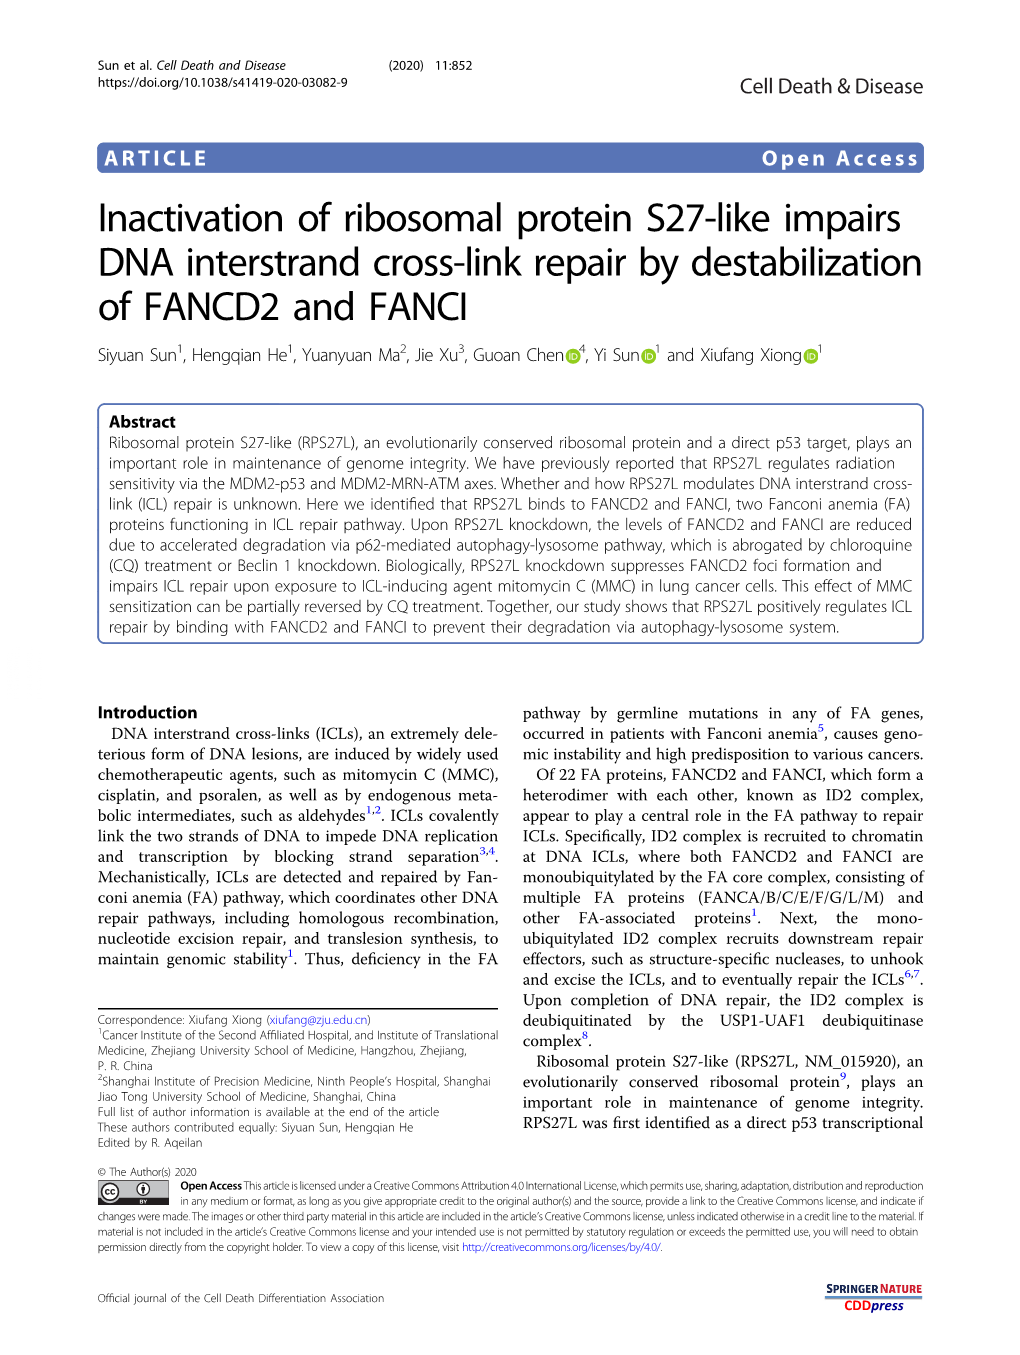 Inactivation of Ribosomal Protein S27-Like Impairs DNA Interstrand